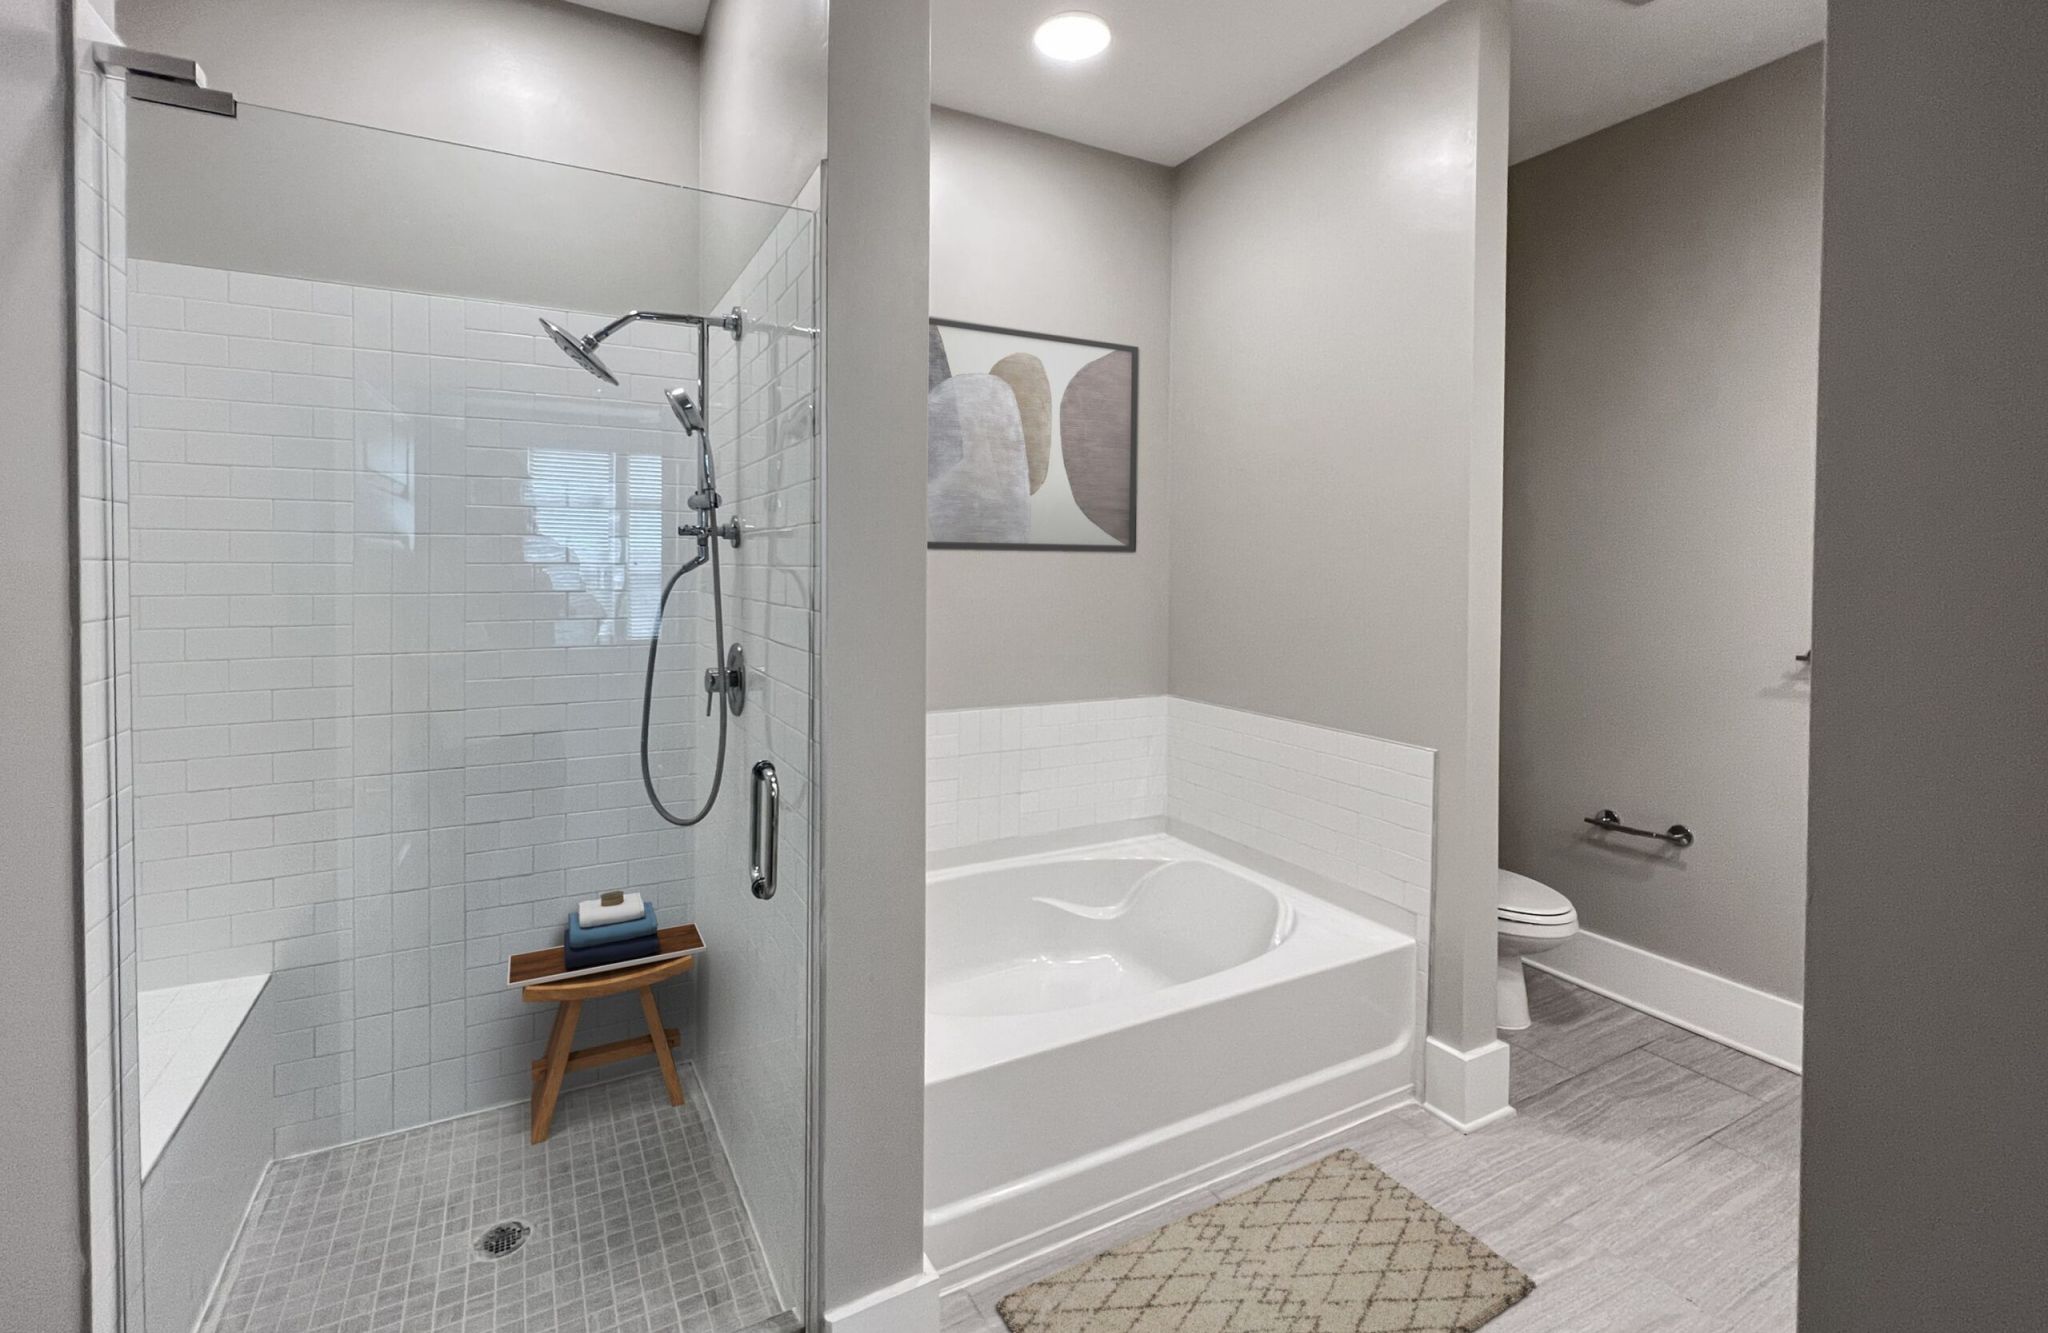 Luxury apartment bathroom with glass-enclosed shower with tile bench and large garden style soaking tub